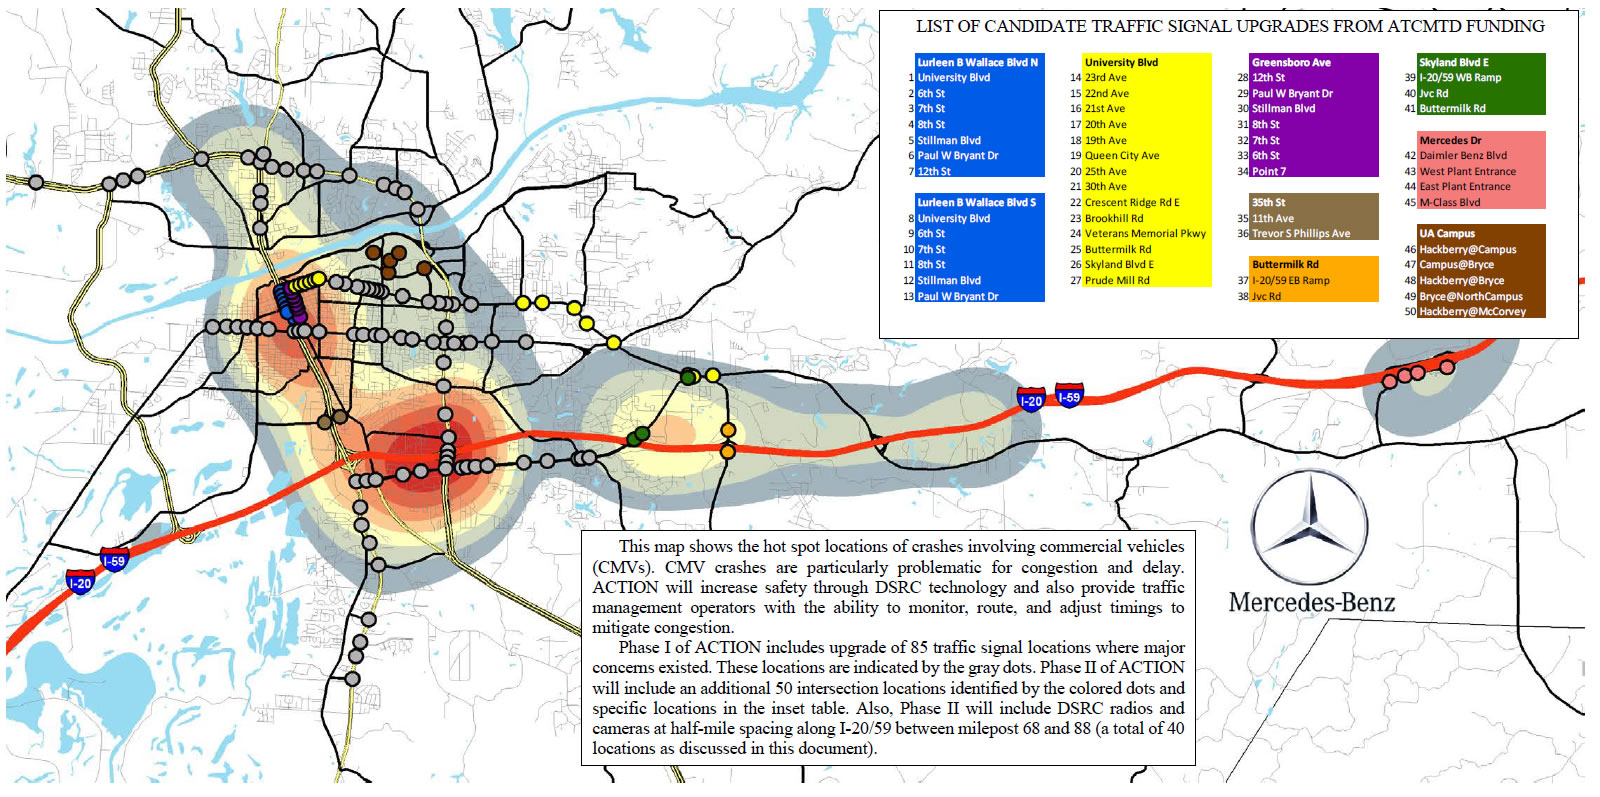 Map of hot spots involving commercial vehicle crashes overlaid with plans to address issues. This map shows the hot spot locations of crashes involving commercial vehicles (CMVs). CMV crashes are particularly problematic for congestion and delay. ACTION will increase safety through DSRC technology and also provide traffic management operators with the ability to monitor, route, and adjust timings to mitigate congestion.
Phase I of ACTION includes upgrade of 85 traffic signal locations where major concerns existed. These locations are indicated by the gray dots. Phase II of ACTION will include an additional 50 intersection locations identified by the colored dots and specific locations in the inset table. Also, Phase II will include DSRC radios and cameras at half-mile spacing along I-20/59 between milepost 68 and 88 (a total of 40 locations as discussed in this document).